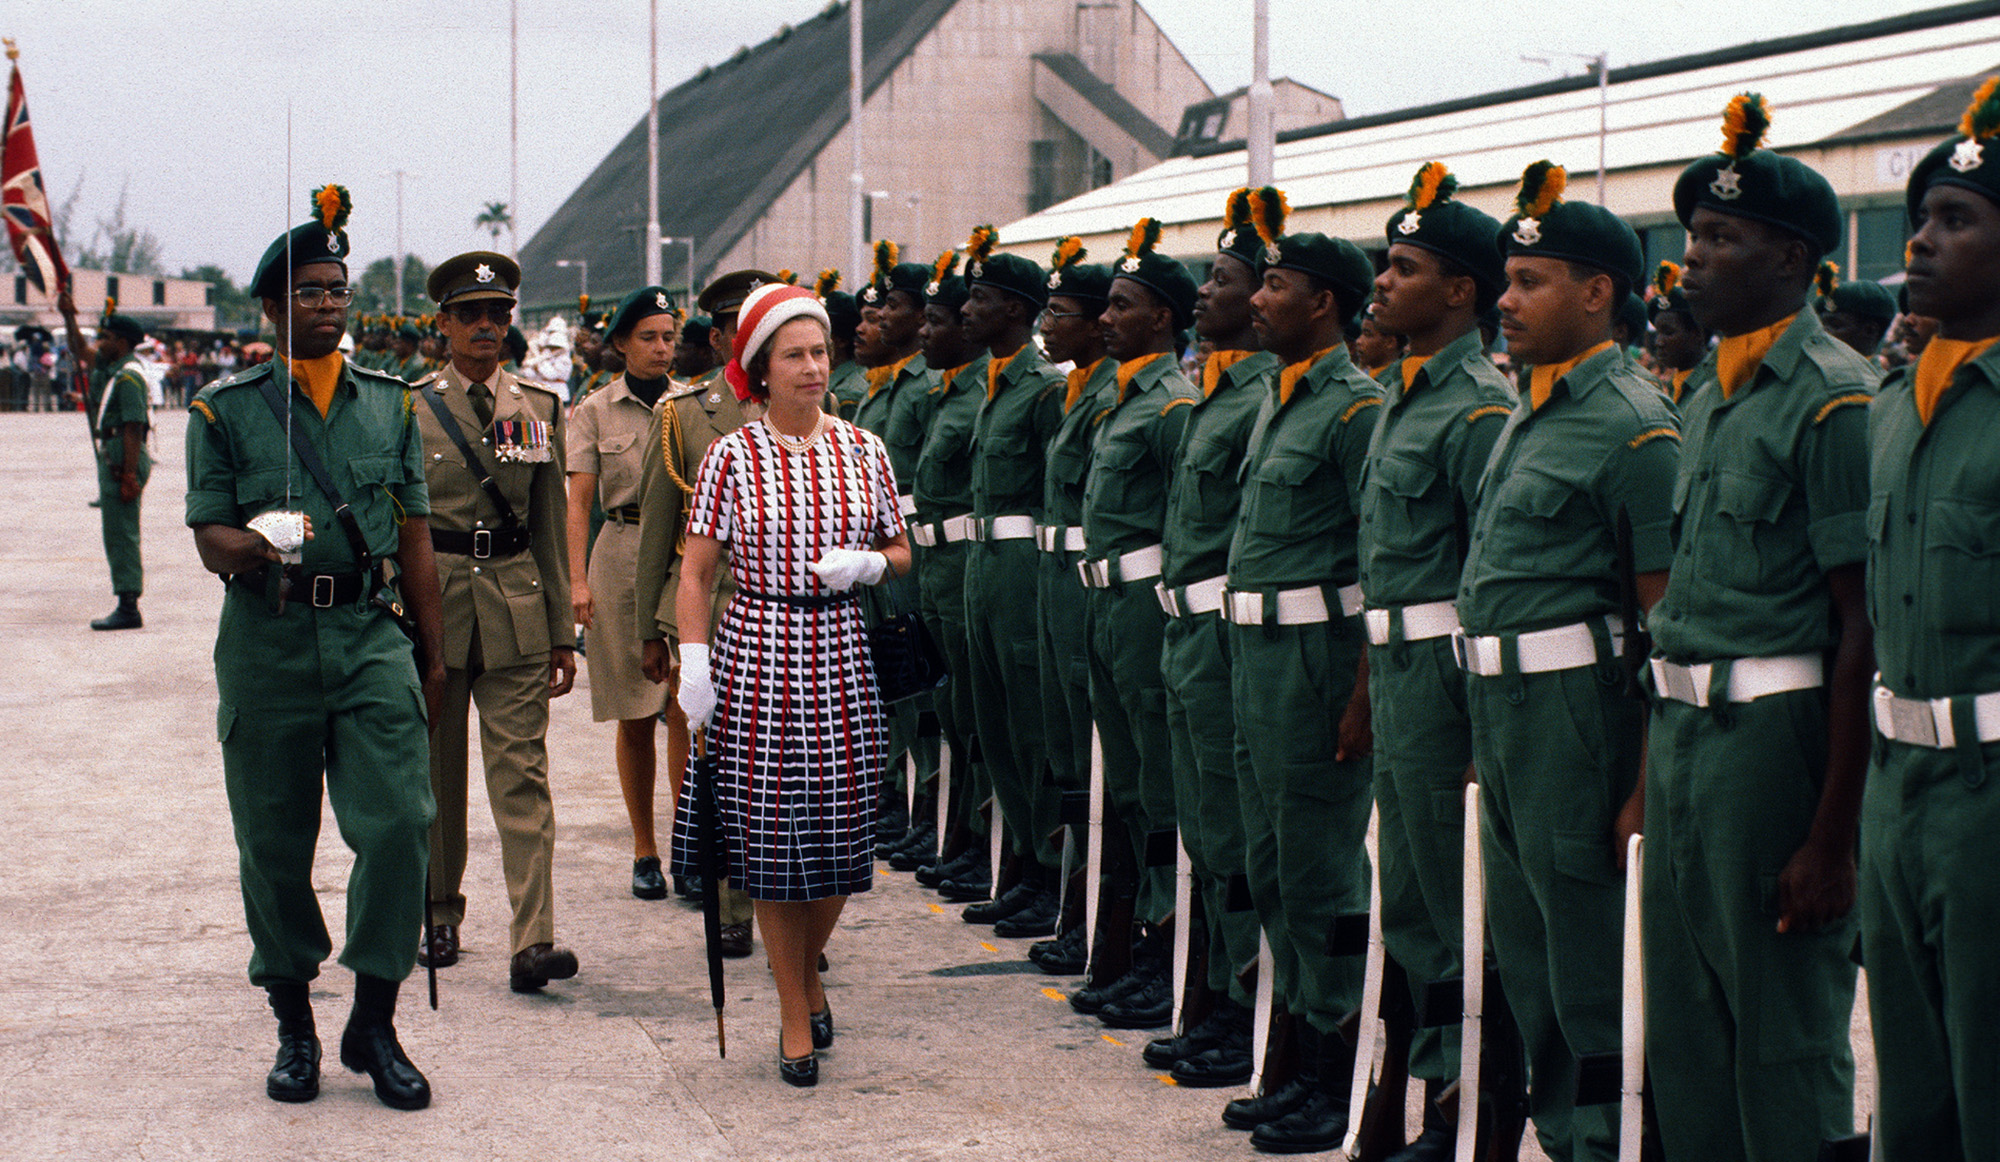 Queen Elizabeth ll inspects a guard of honour as she arrives&nbsp;in Barbados in 1977.